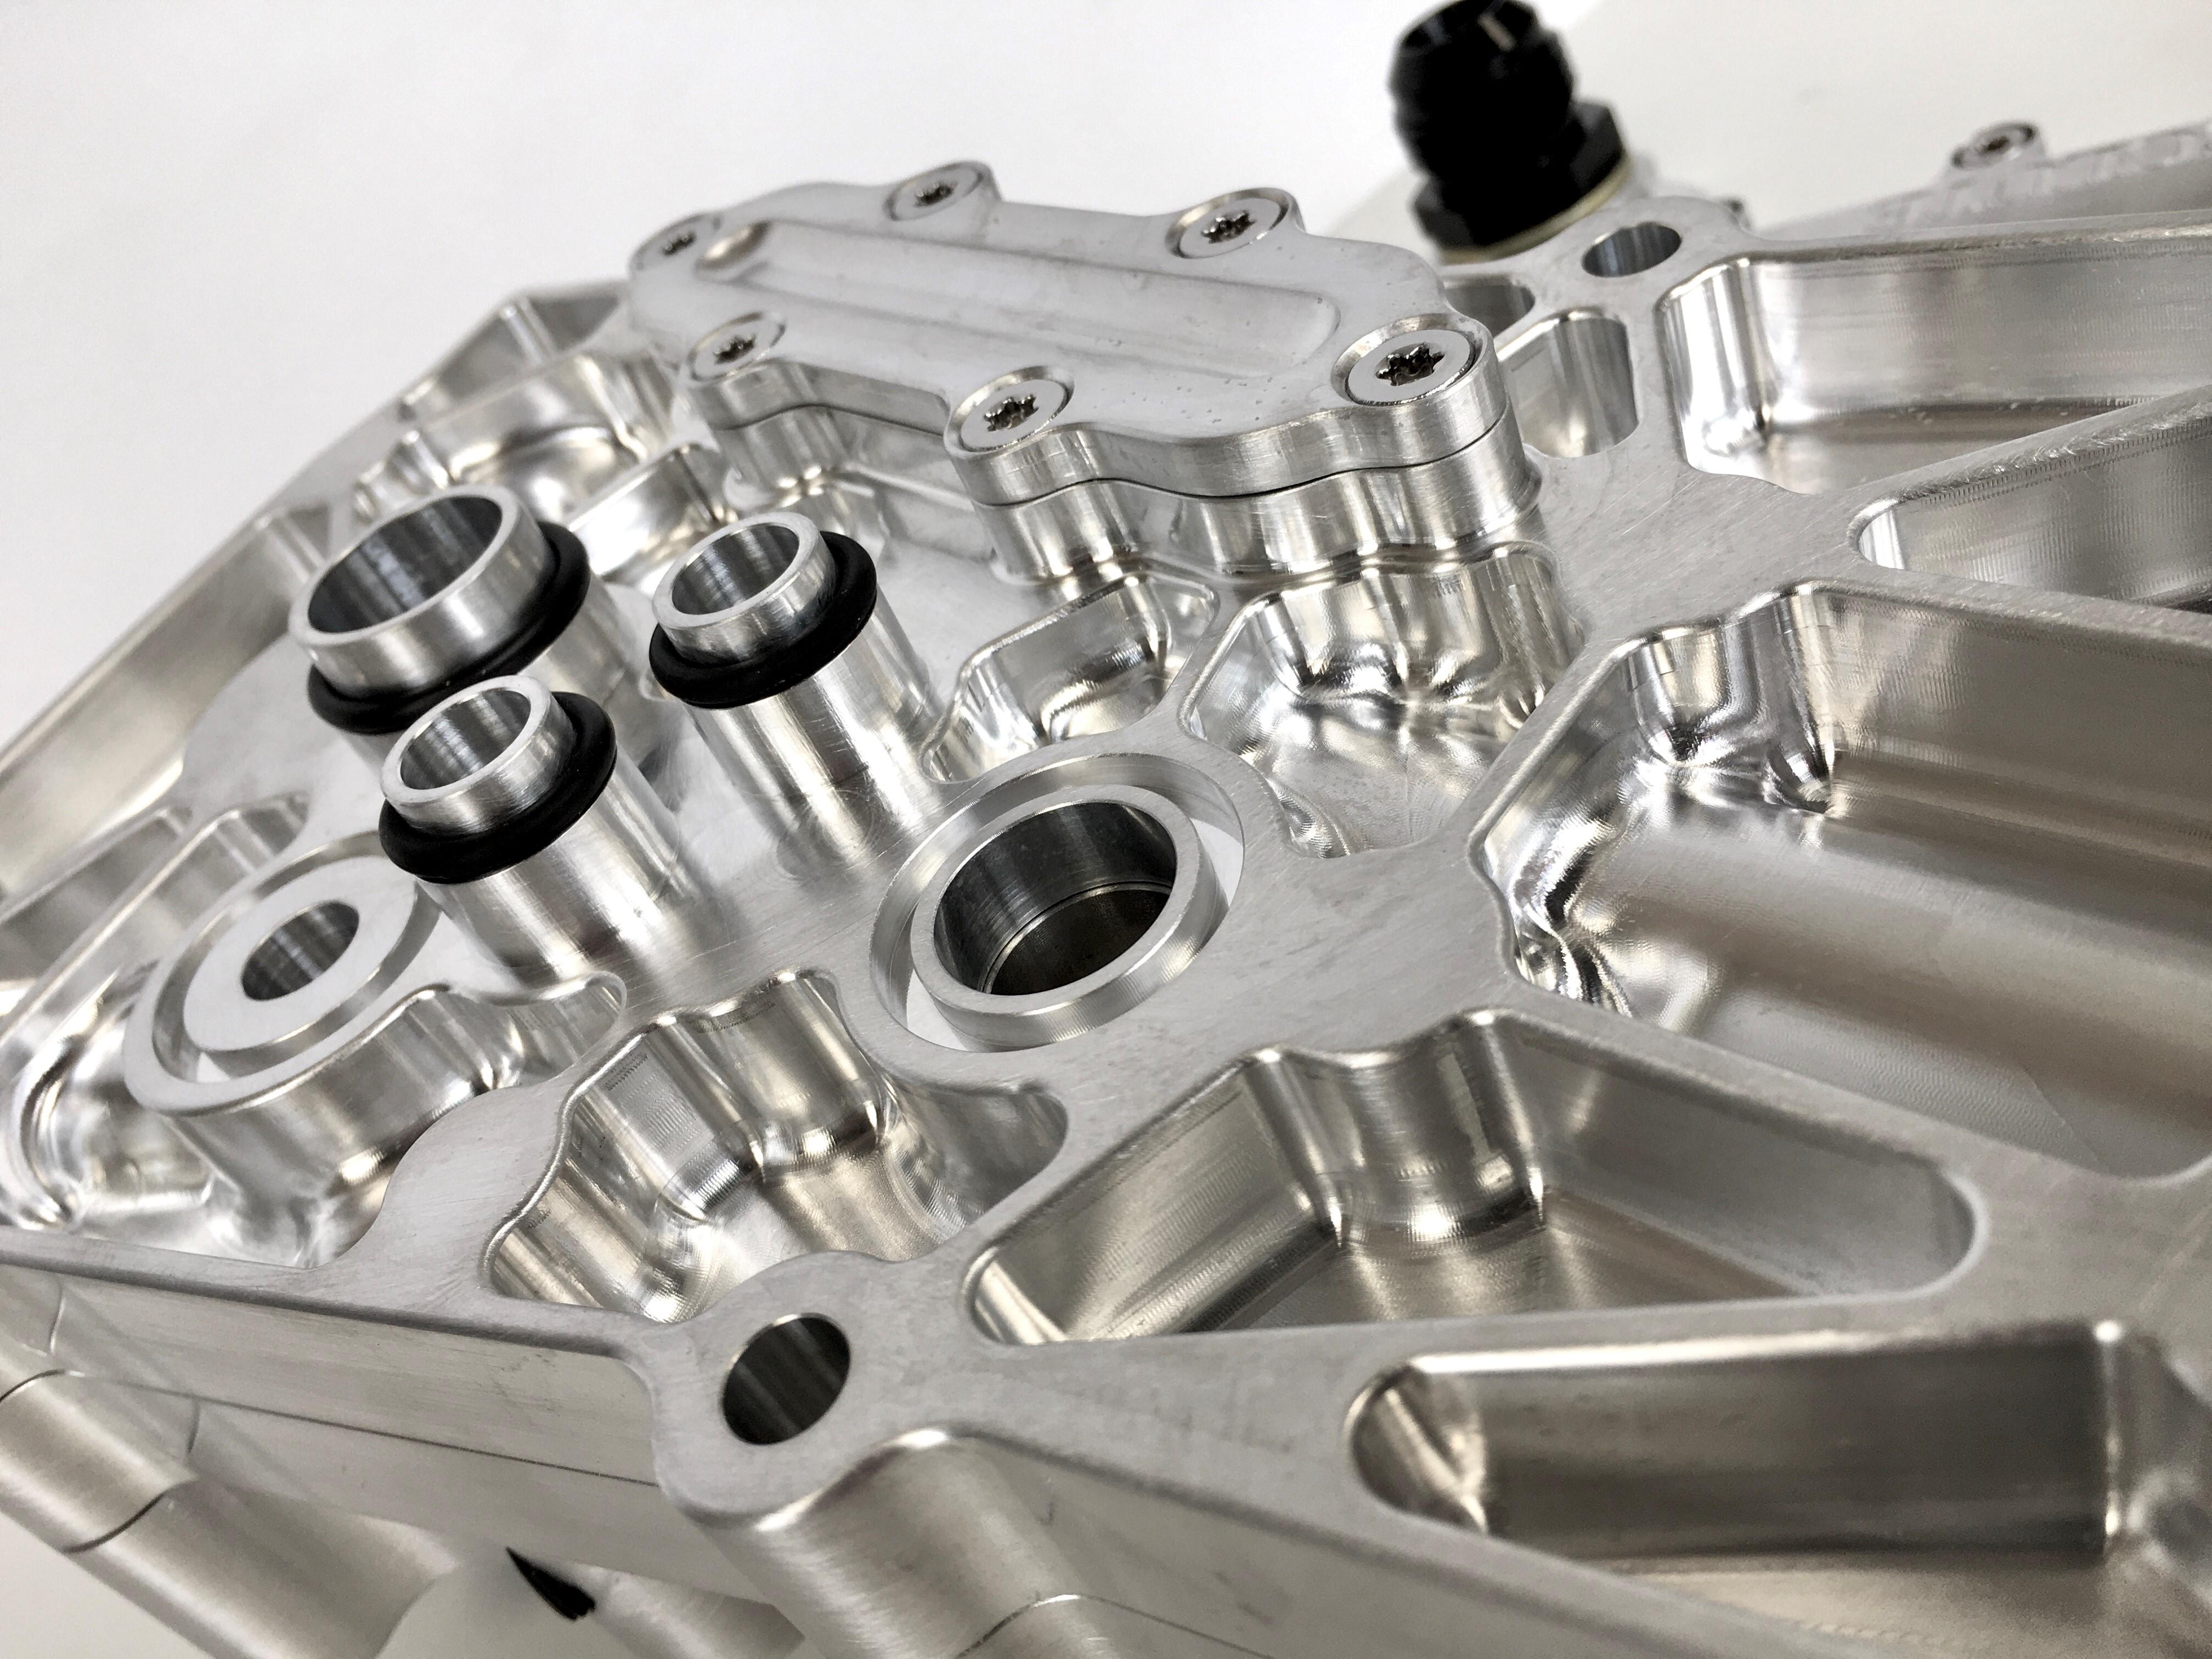 Bespoke Supercar Oil system Component